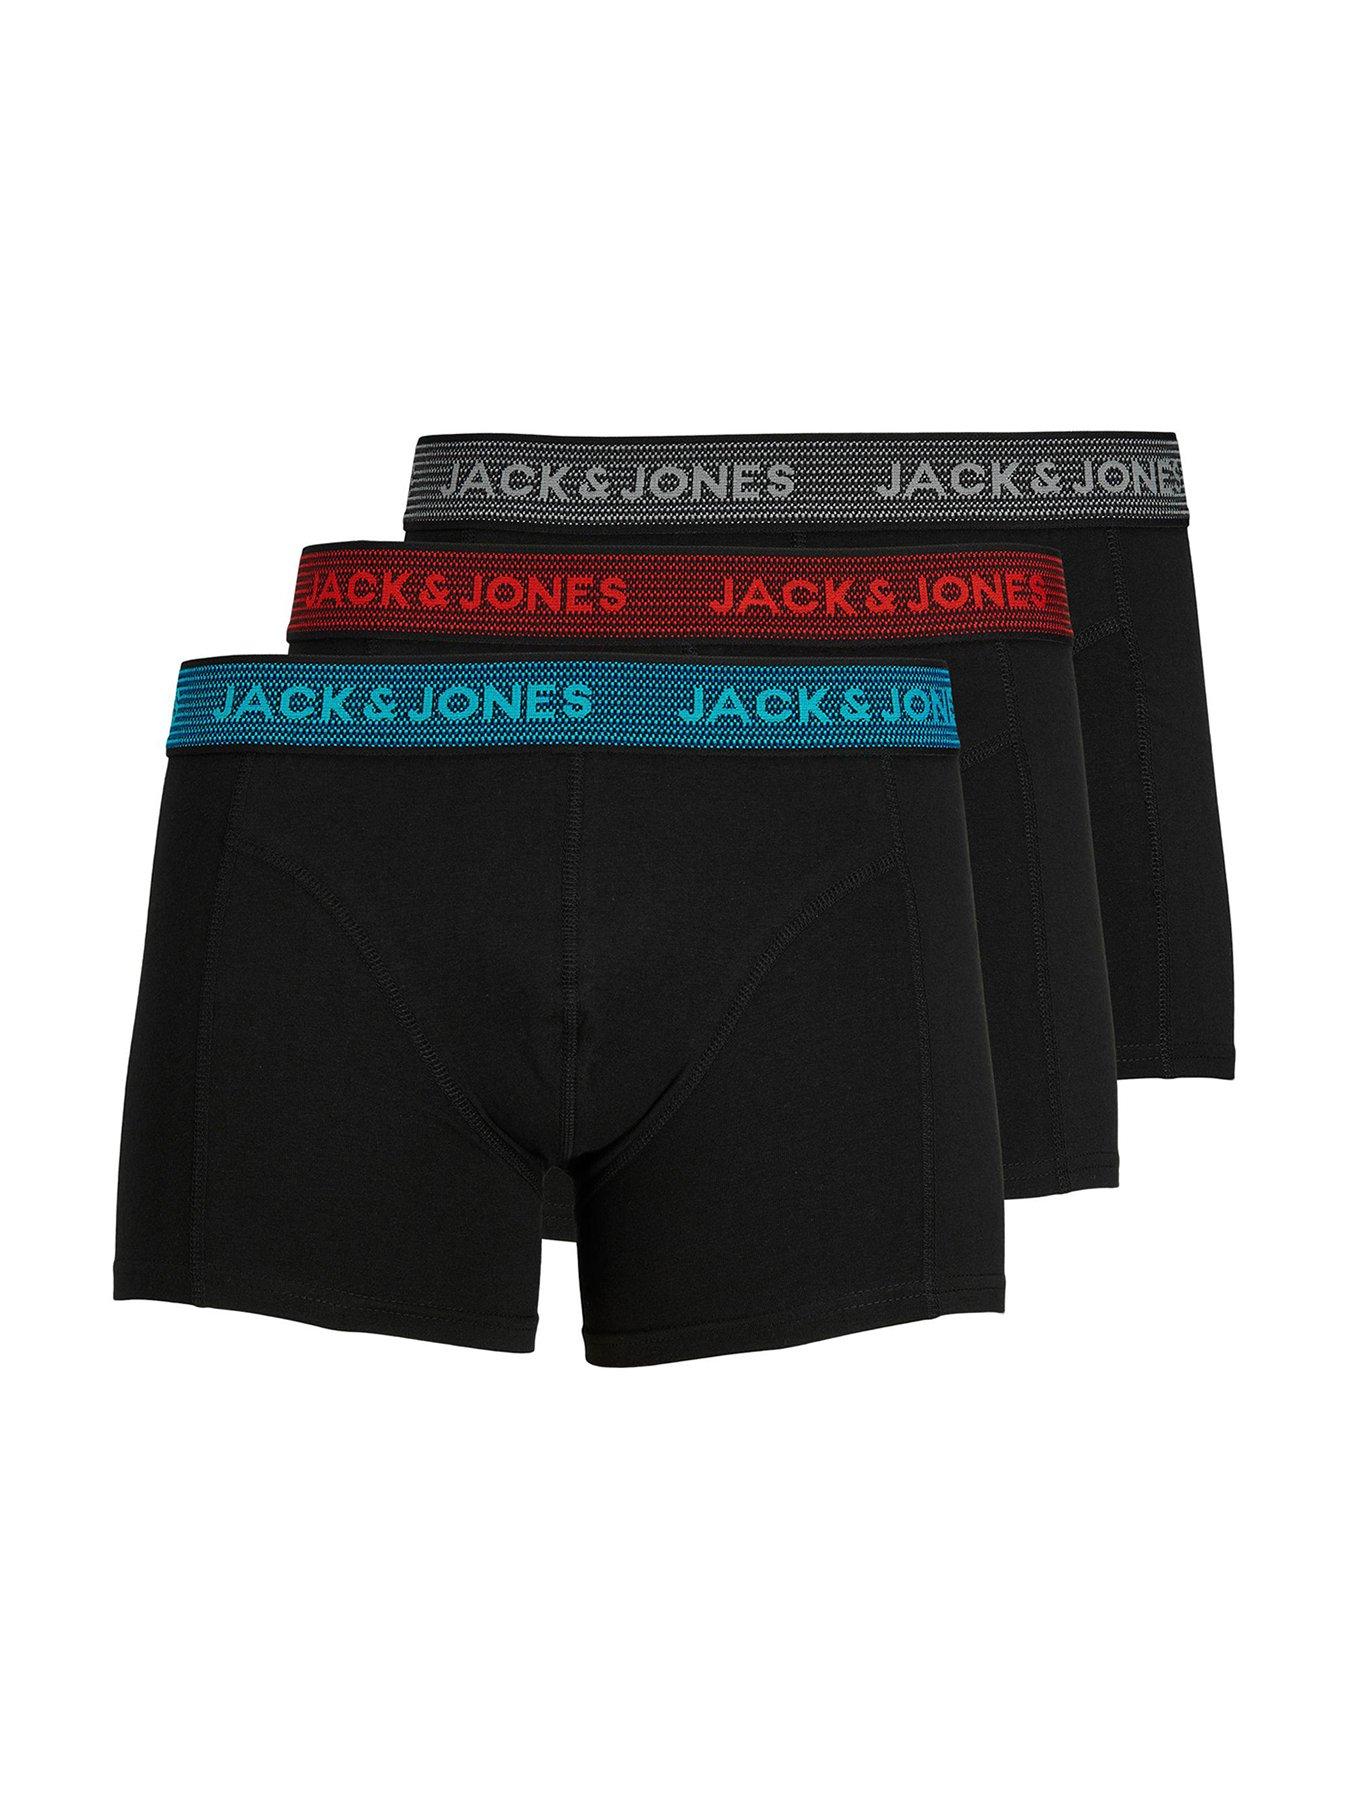 UNDER ARMOUR Charged Cotton 6in Boxers - 3 Pack